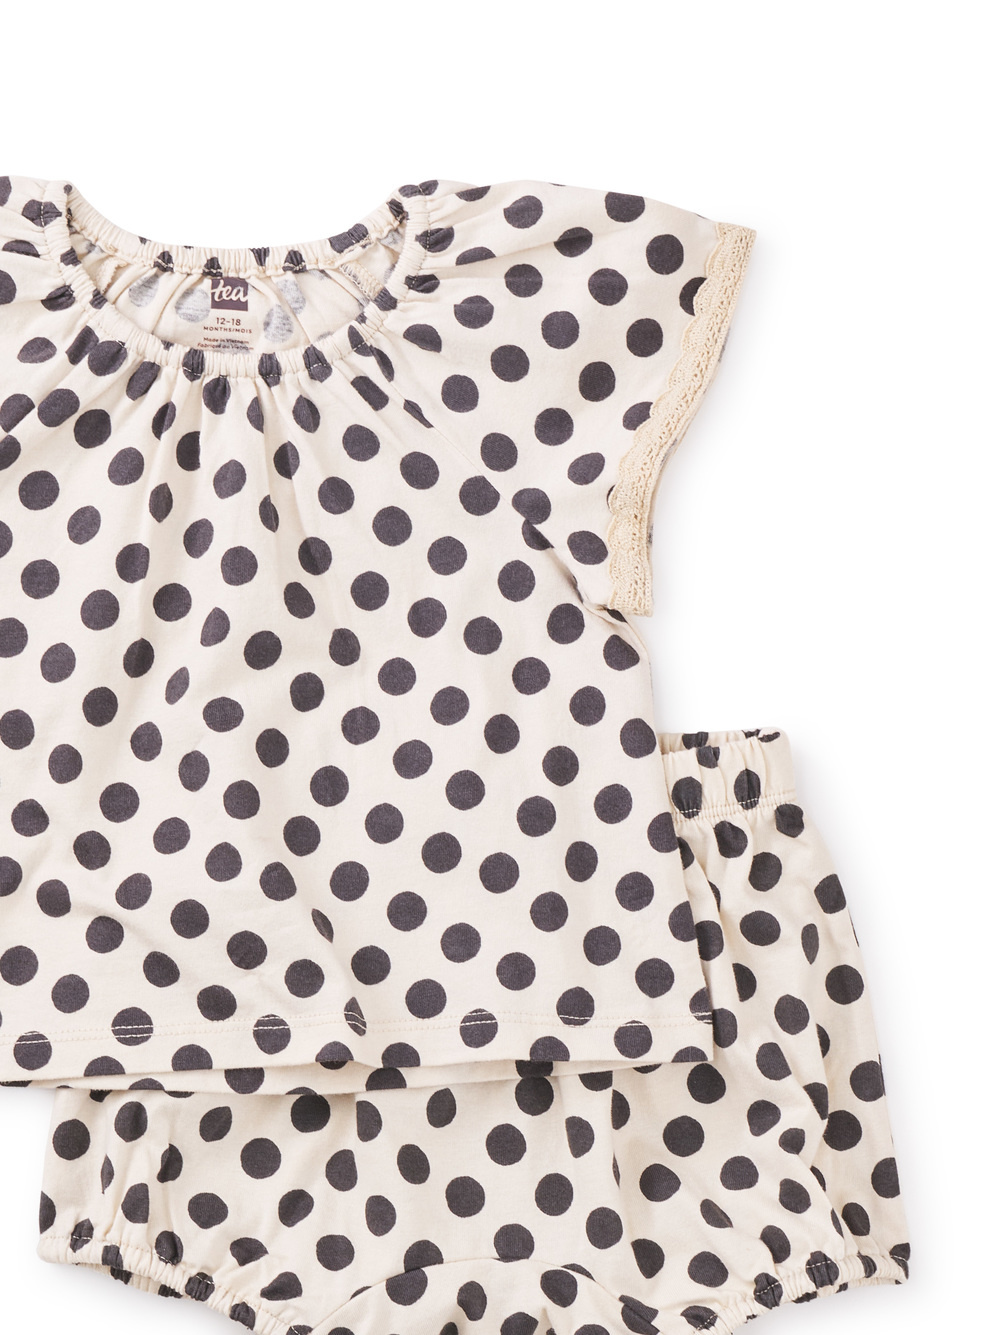 Tea Collection Classic Dots Baby Dress & Bloomer Set